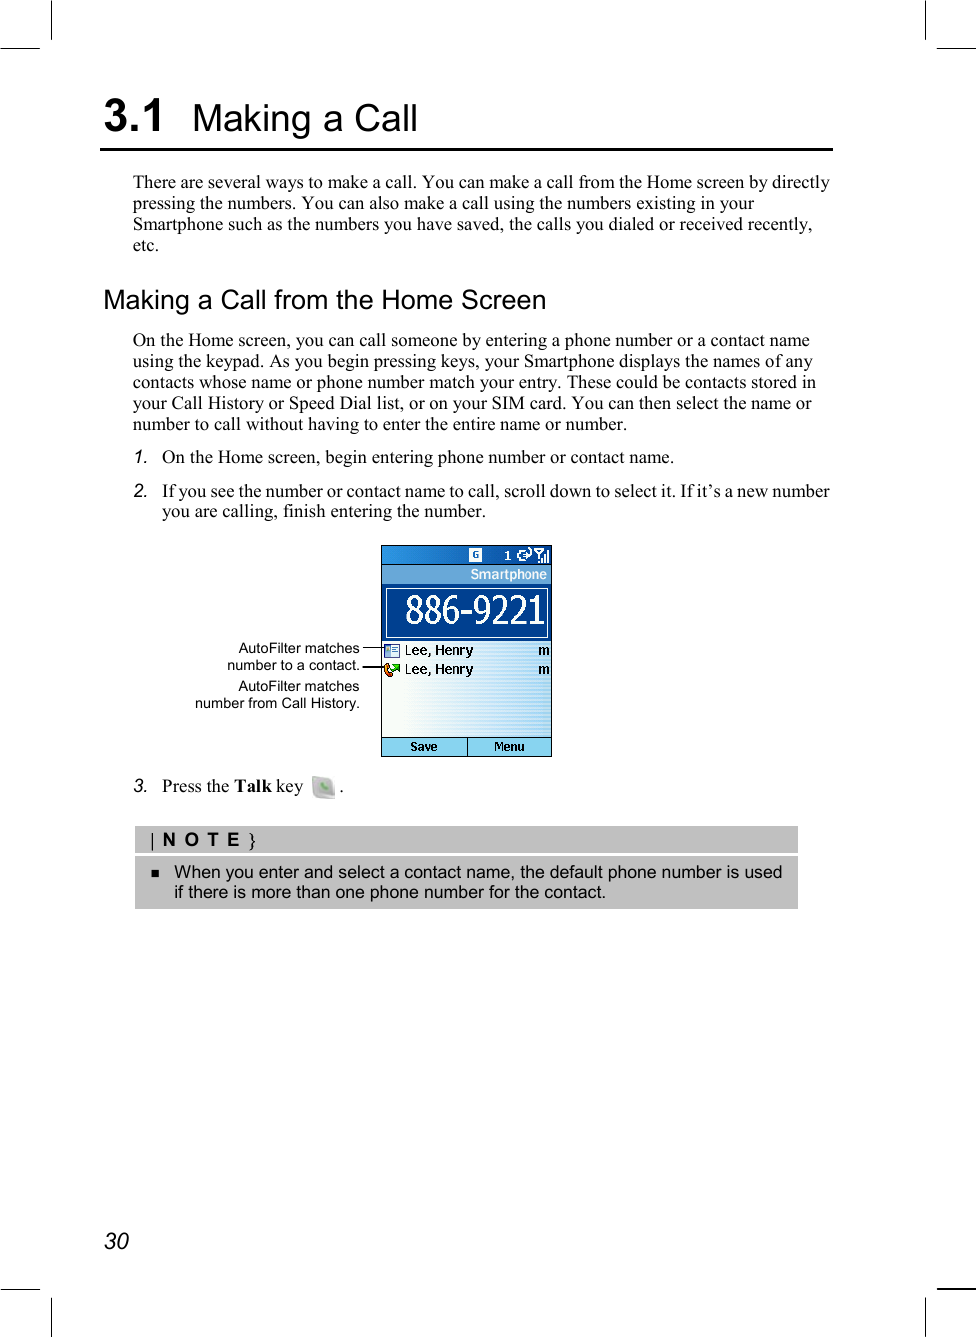  30 3.1  Making a Call There are several ways to make a call. You can make a call from the Home screen by directly pressing the numbers. You can also make a call using the numbers existing in your Smartphone such as the numbers you have saved, the calls you dialed or received recently, etc.  Making a Call from the Home Screen On the Home screen, you can call someone by entering a phone number or a contact name using the keypad. As you begin pressing keys, your Smartphone displays the names of any contacts whose name or phone number match your entry. These could be contacts stored in your Call History or Speed Dial list, or on your SIM card. You can then select the name or number to call without having to enter the entire name or number. 1.  On the Home screen, begin entering phone number or contact name. 2.  If you see the number or contact name to call, scroll down to select it. If it’s a new number you are calling, finish entering the number.  3.  Press the Talk key    .  |NOTE}   When you enter and select a contact name, the default phone number is used if there is more than one phone number for the contact.  AutoFilter matches number to a contact. AutoFilter matches number from Call History. 